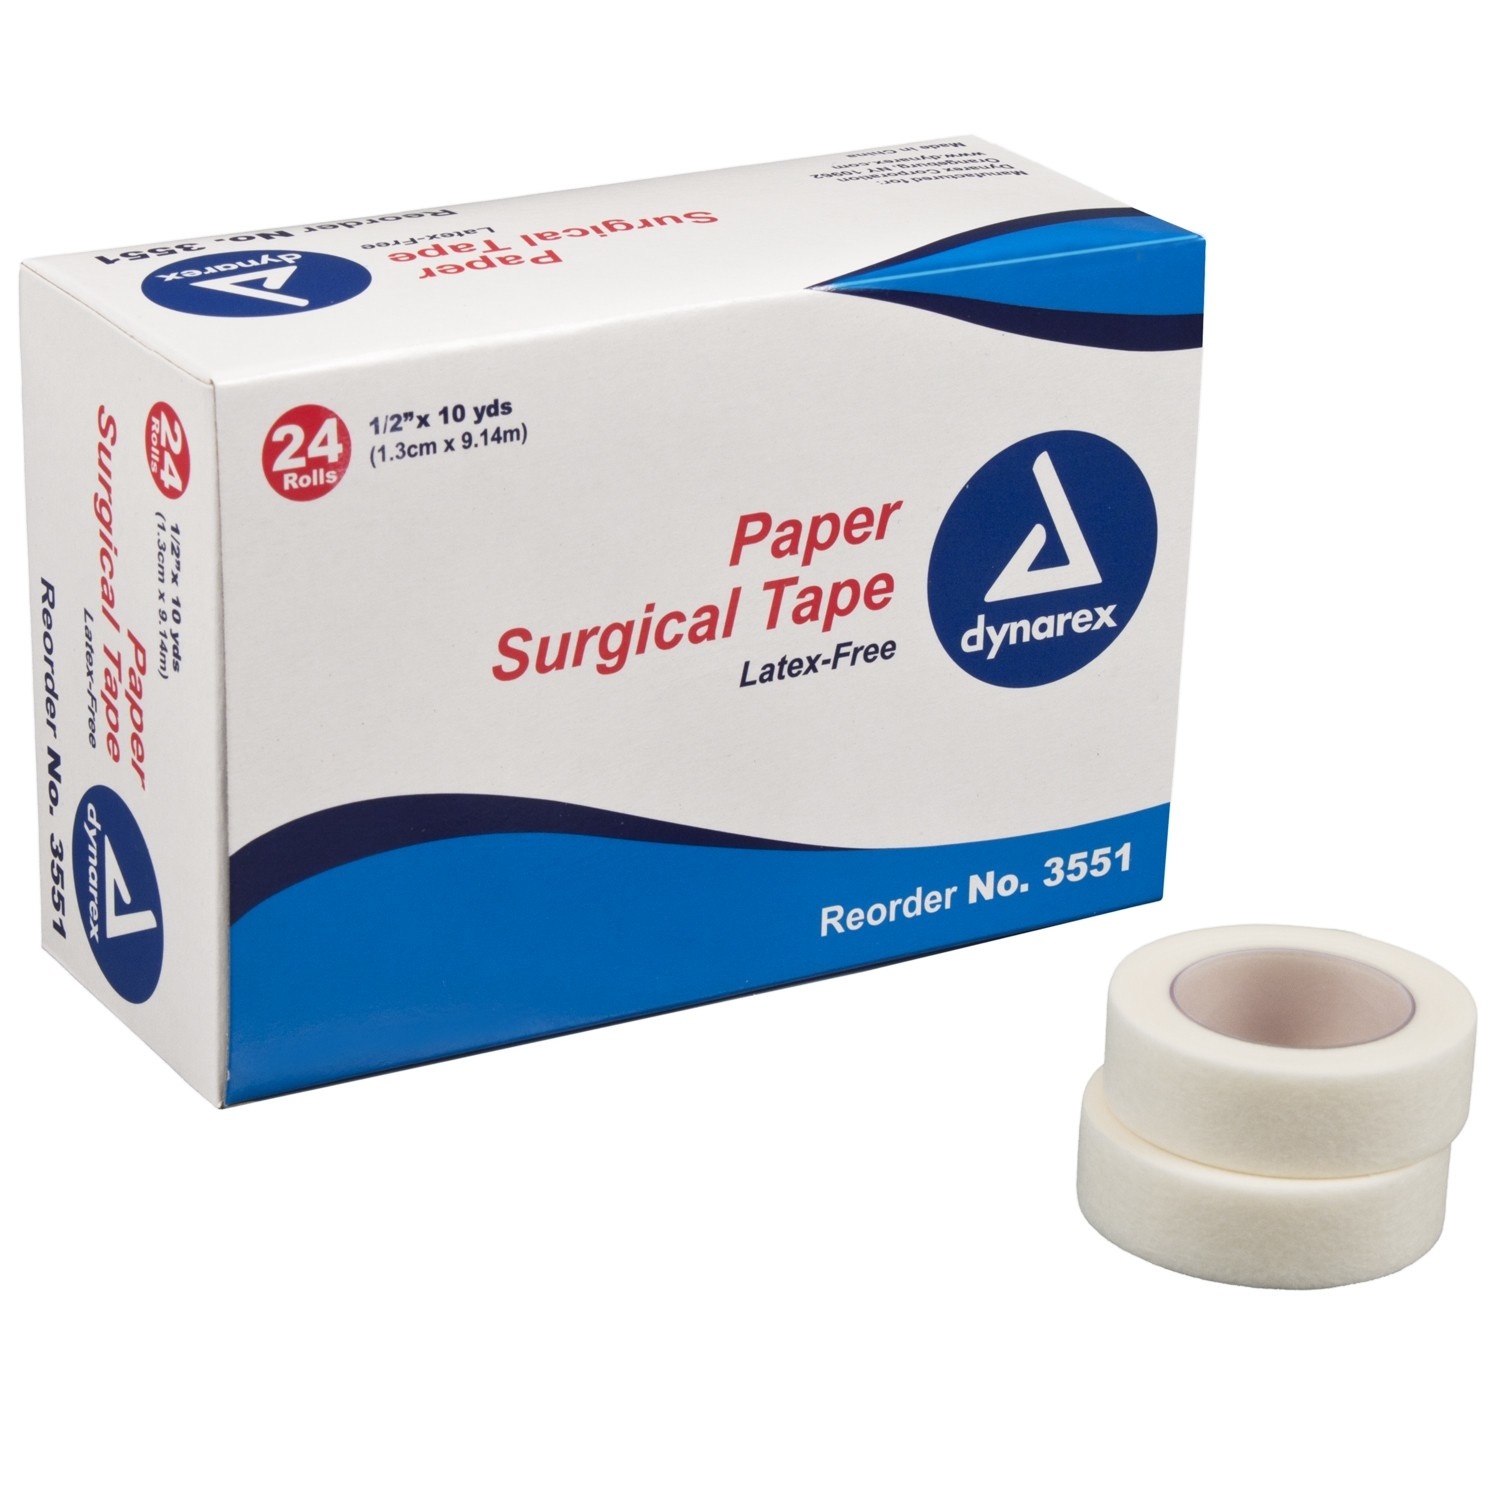 Dynarex Surgical Tape Paper 1/2” x 10yards